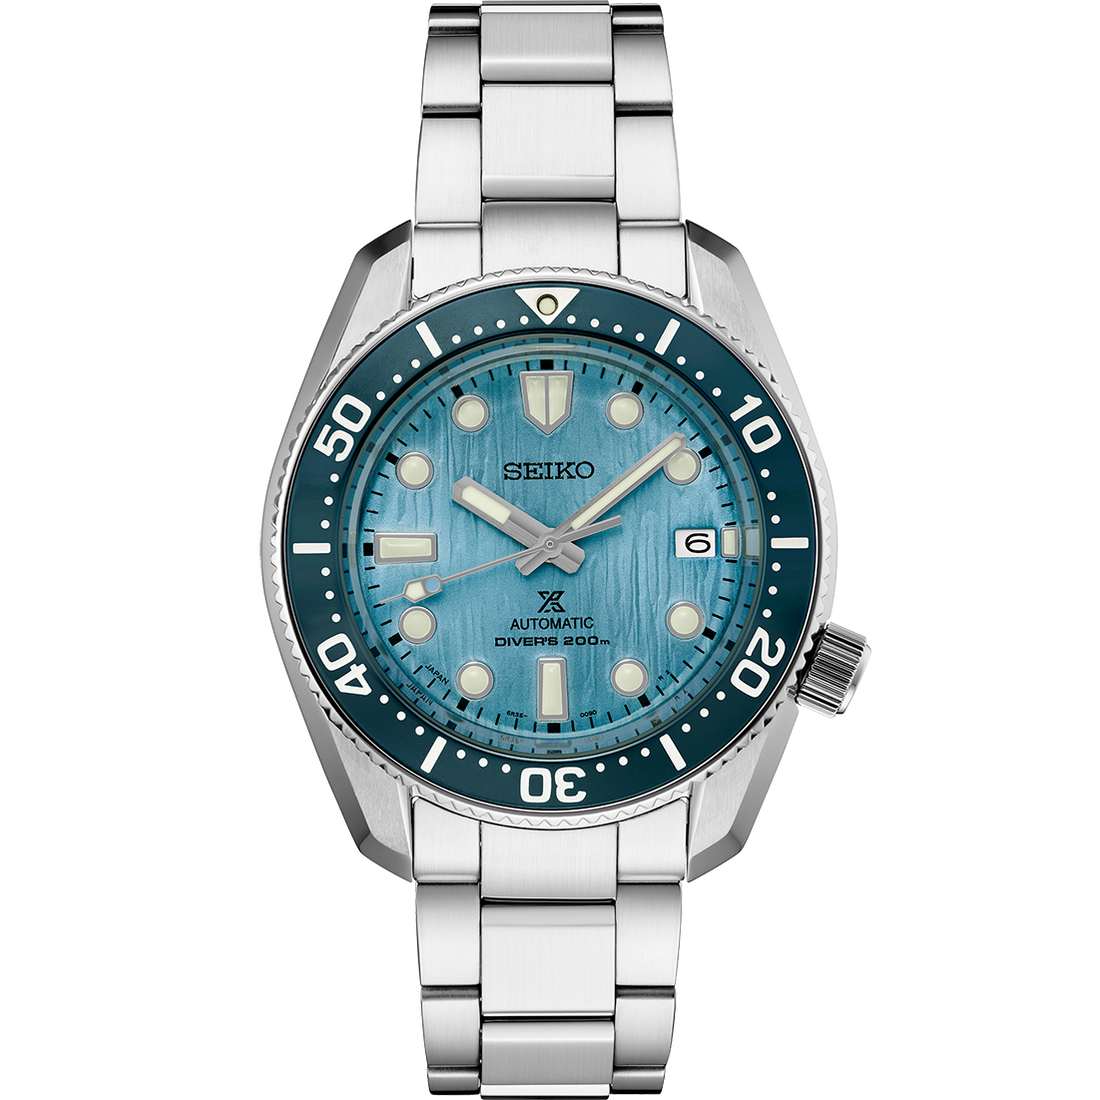 Seiko Prospex SPB299 "Save the Ocean" Special Edition 42mm Dive Automatic | Skeie's